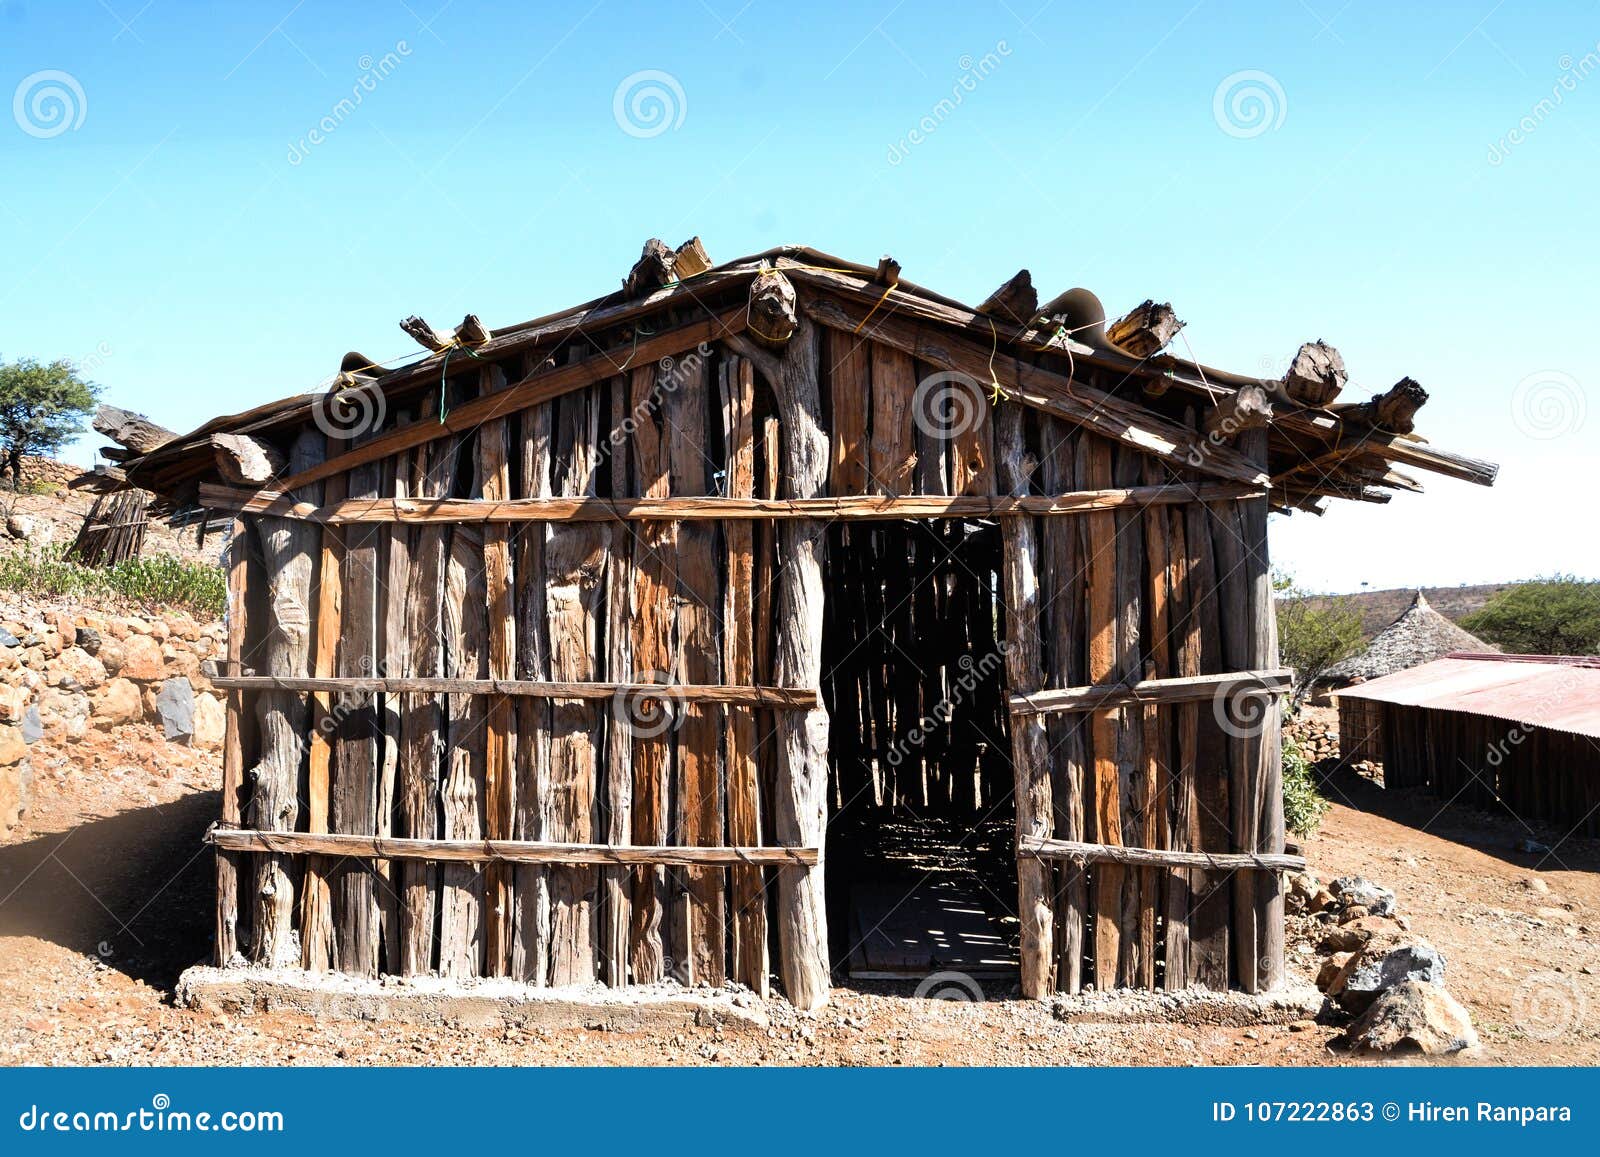 typical djiboutian huts in a village in northern djibouti, day forest national park forÃÂªt du day in horn of africa